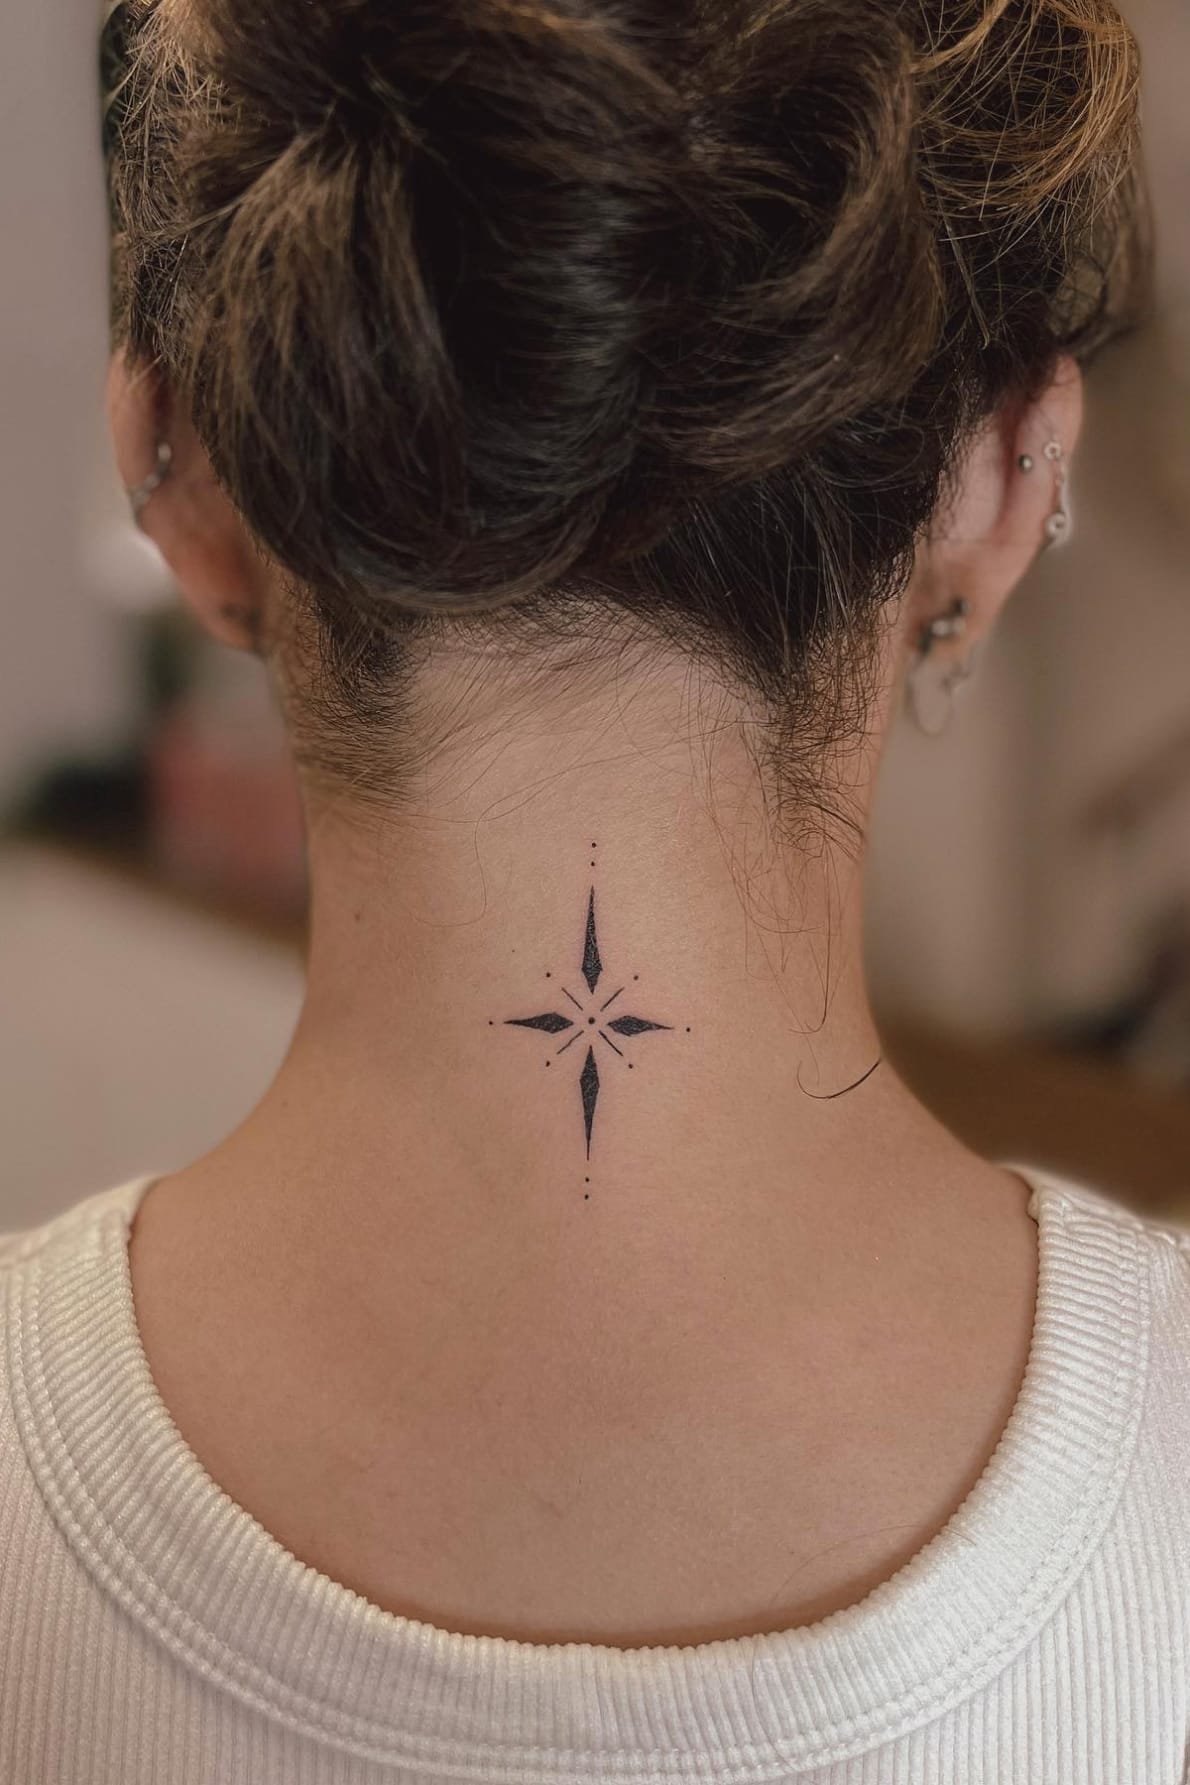 Small Star Tattoo on the Back of the Neck